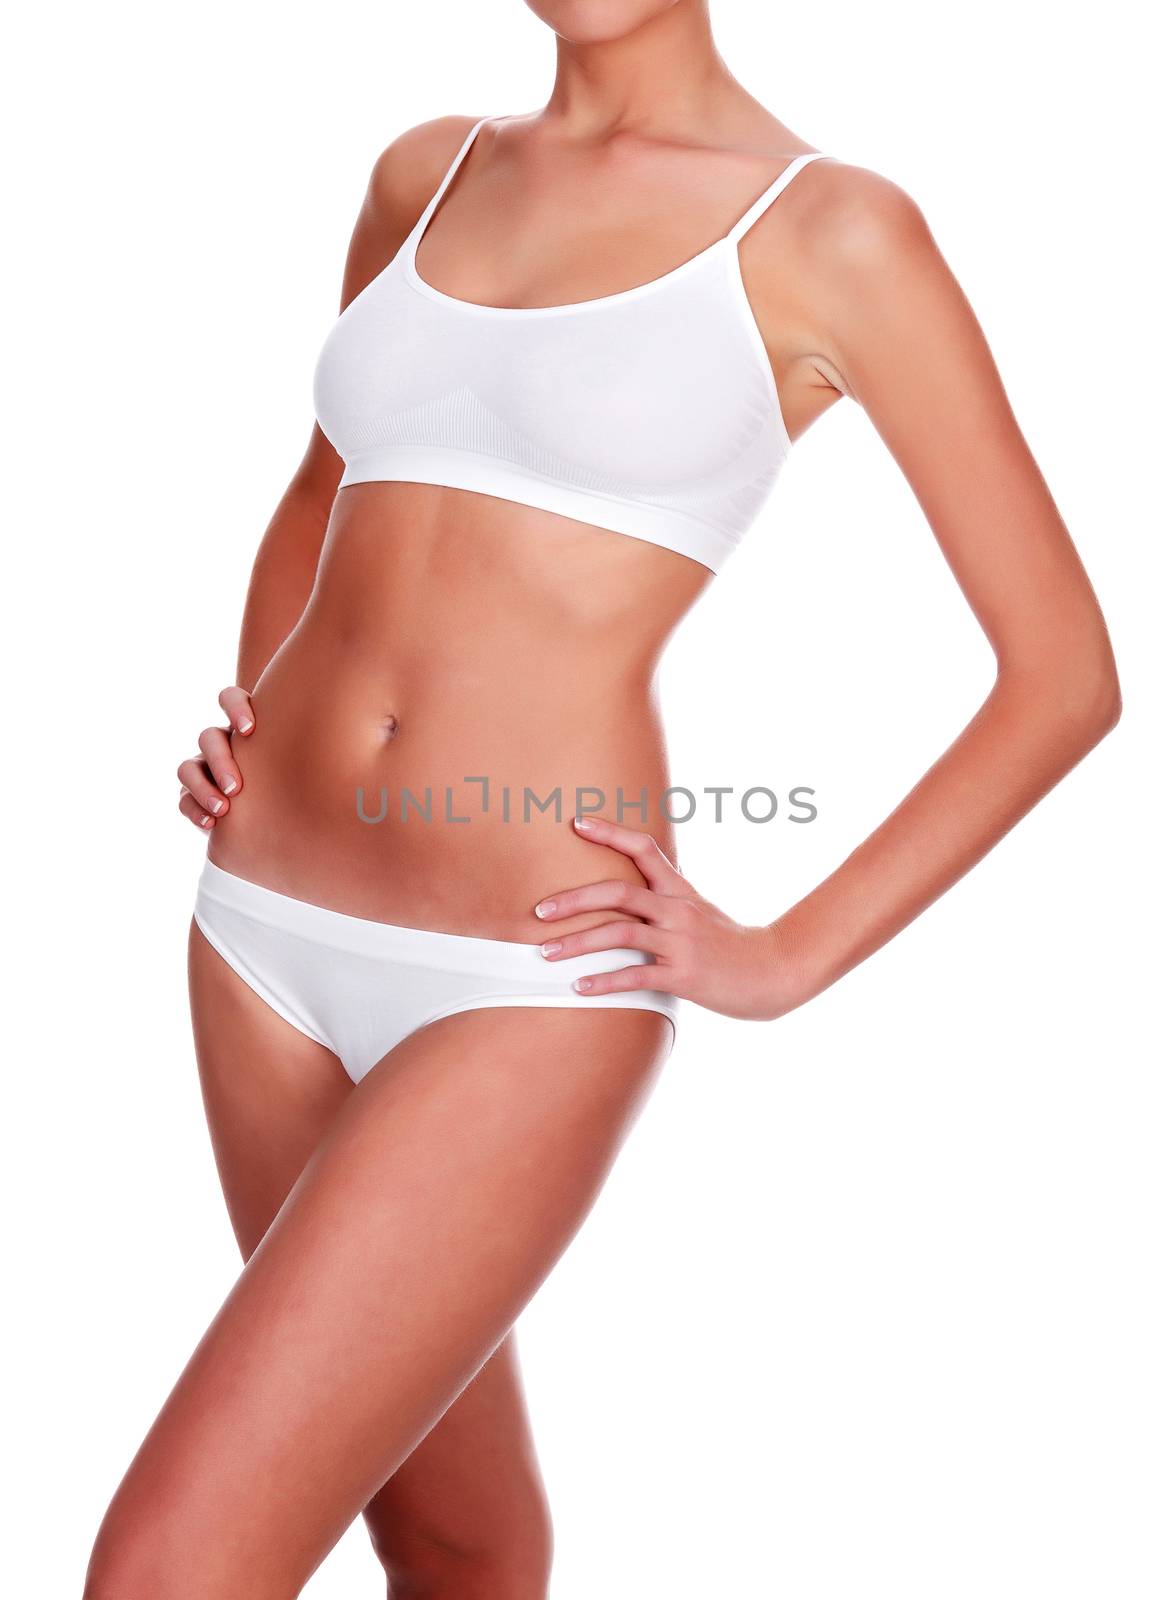 Slim woman body on white background, isolated by Nobilior